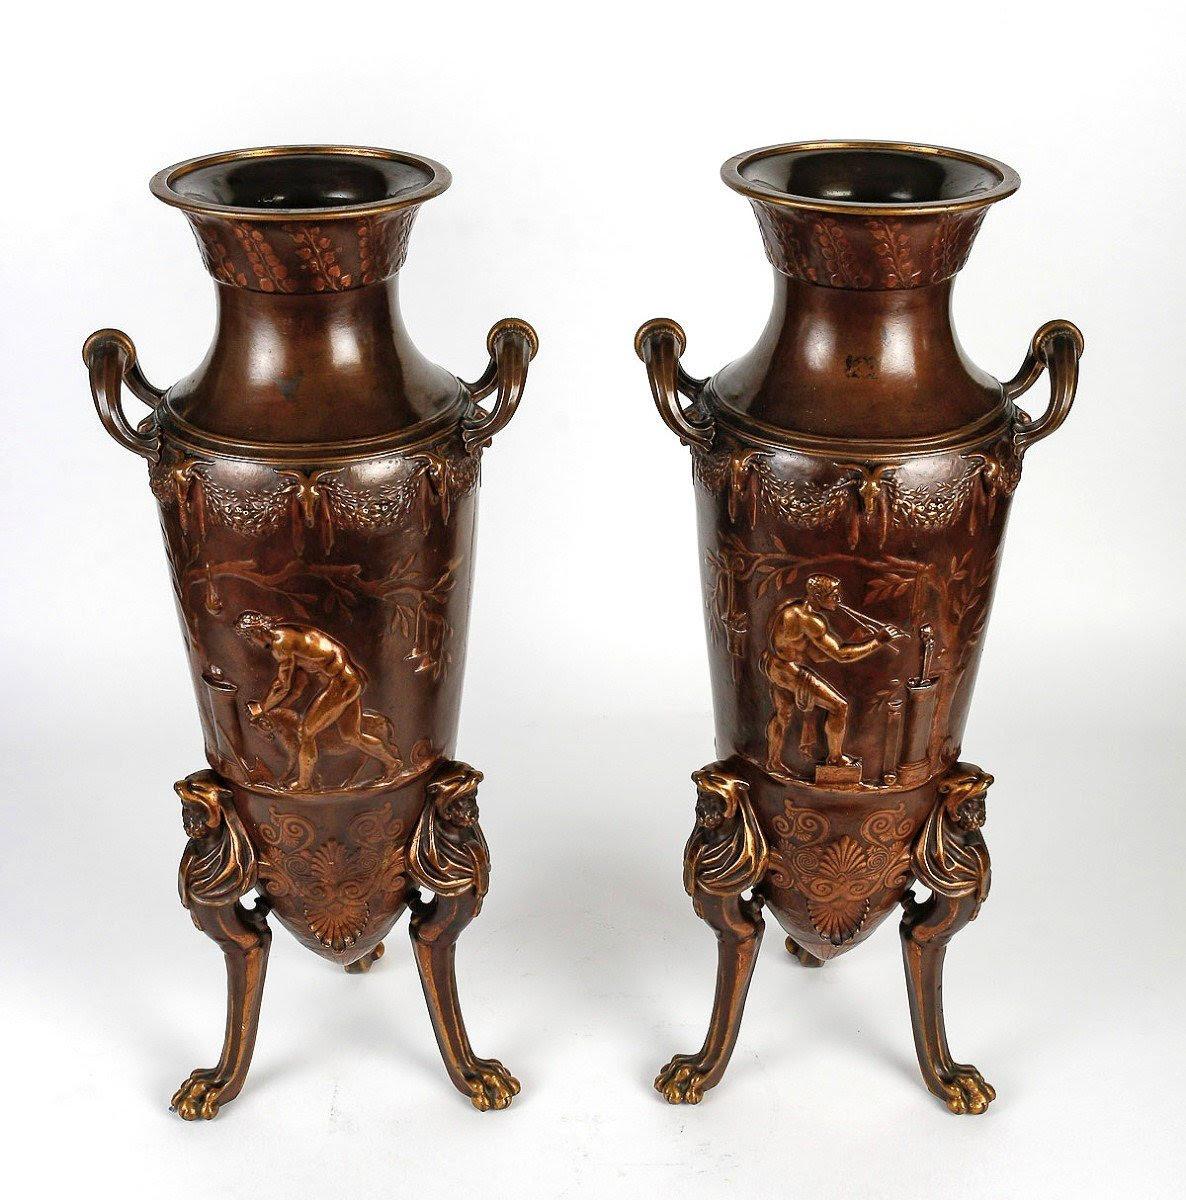 A pair of patinated bronze vases by Ferdinand Barbedienne, 19th century.

A pair of patinated bronze vases by Ferdinand Barbedienne in the taste of Ancient Greece.  
H: 57cm, D: 26cm